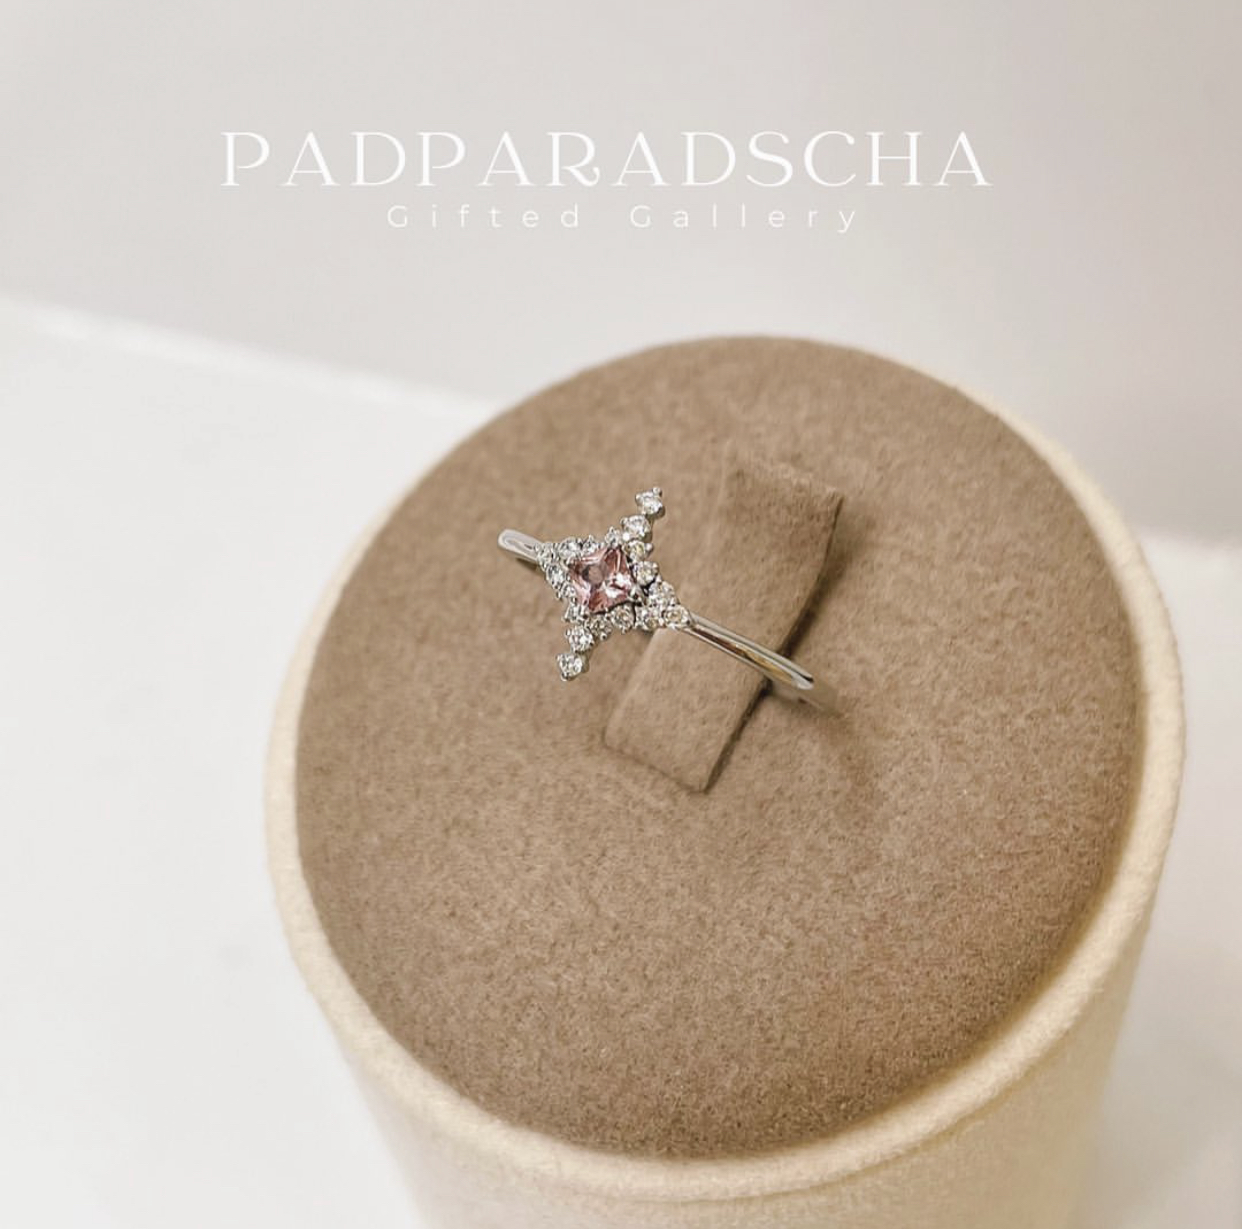 Sold＊Padparadscha Ring by Gifted Gallery